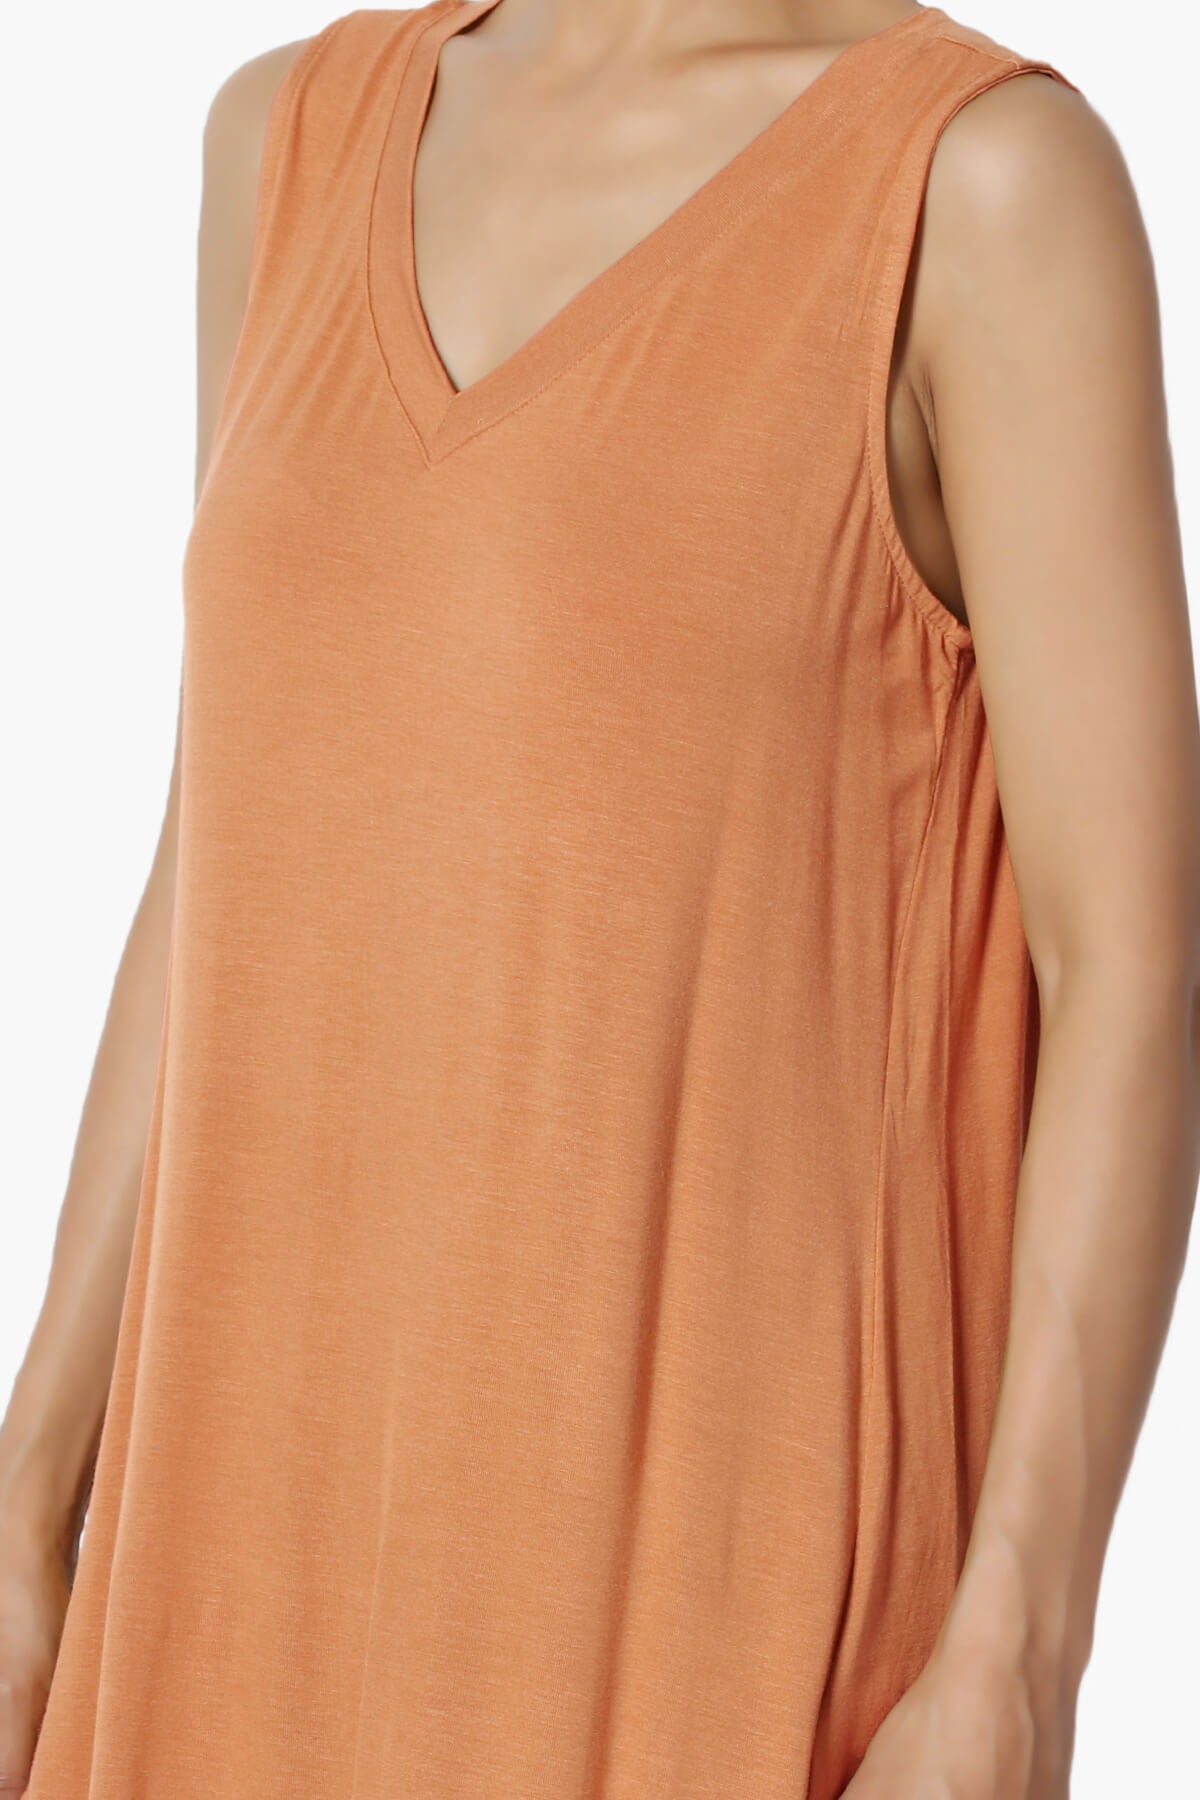 Load image into Gallery viewer, Myles Sleeveless V-Neck Luxe Jersey Top BUTTER ORANGE_5
